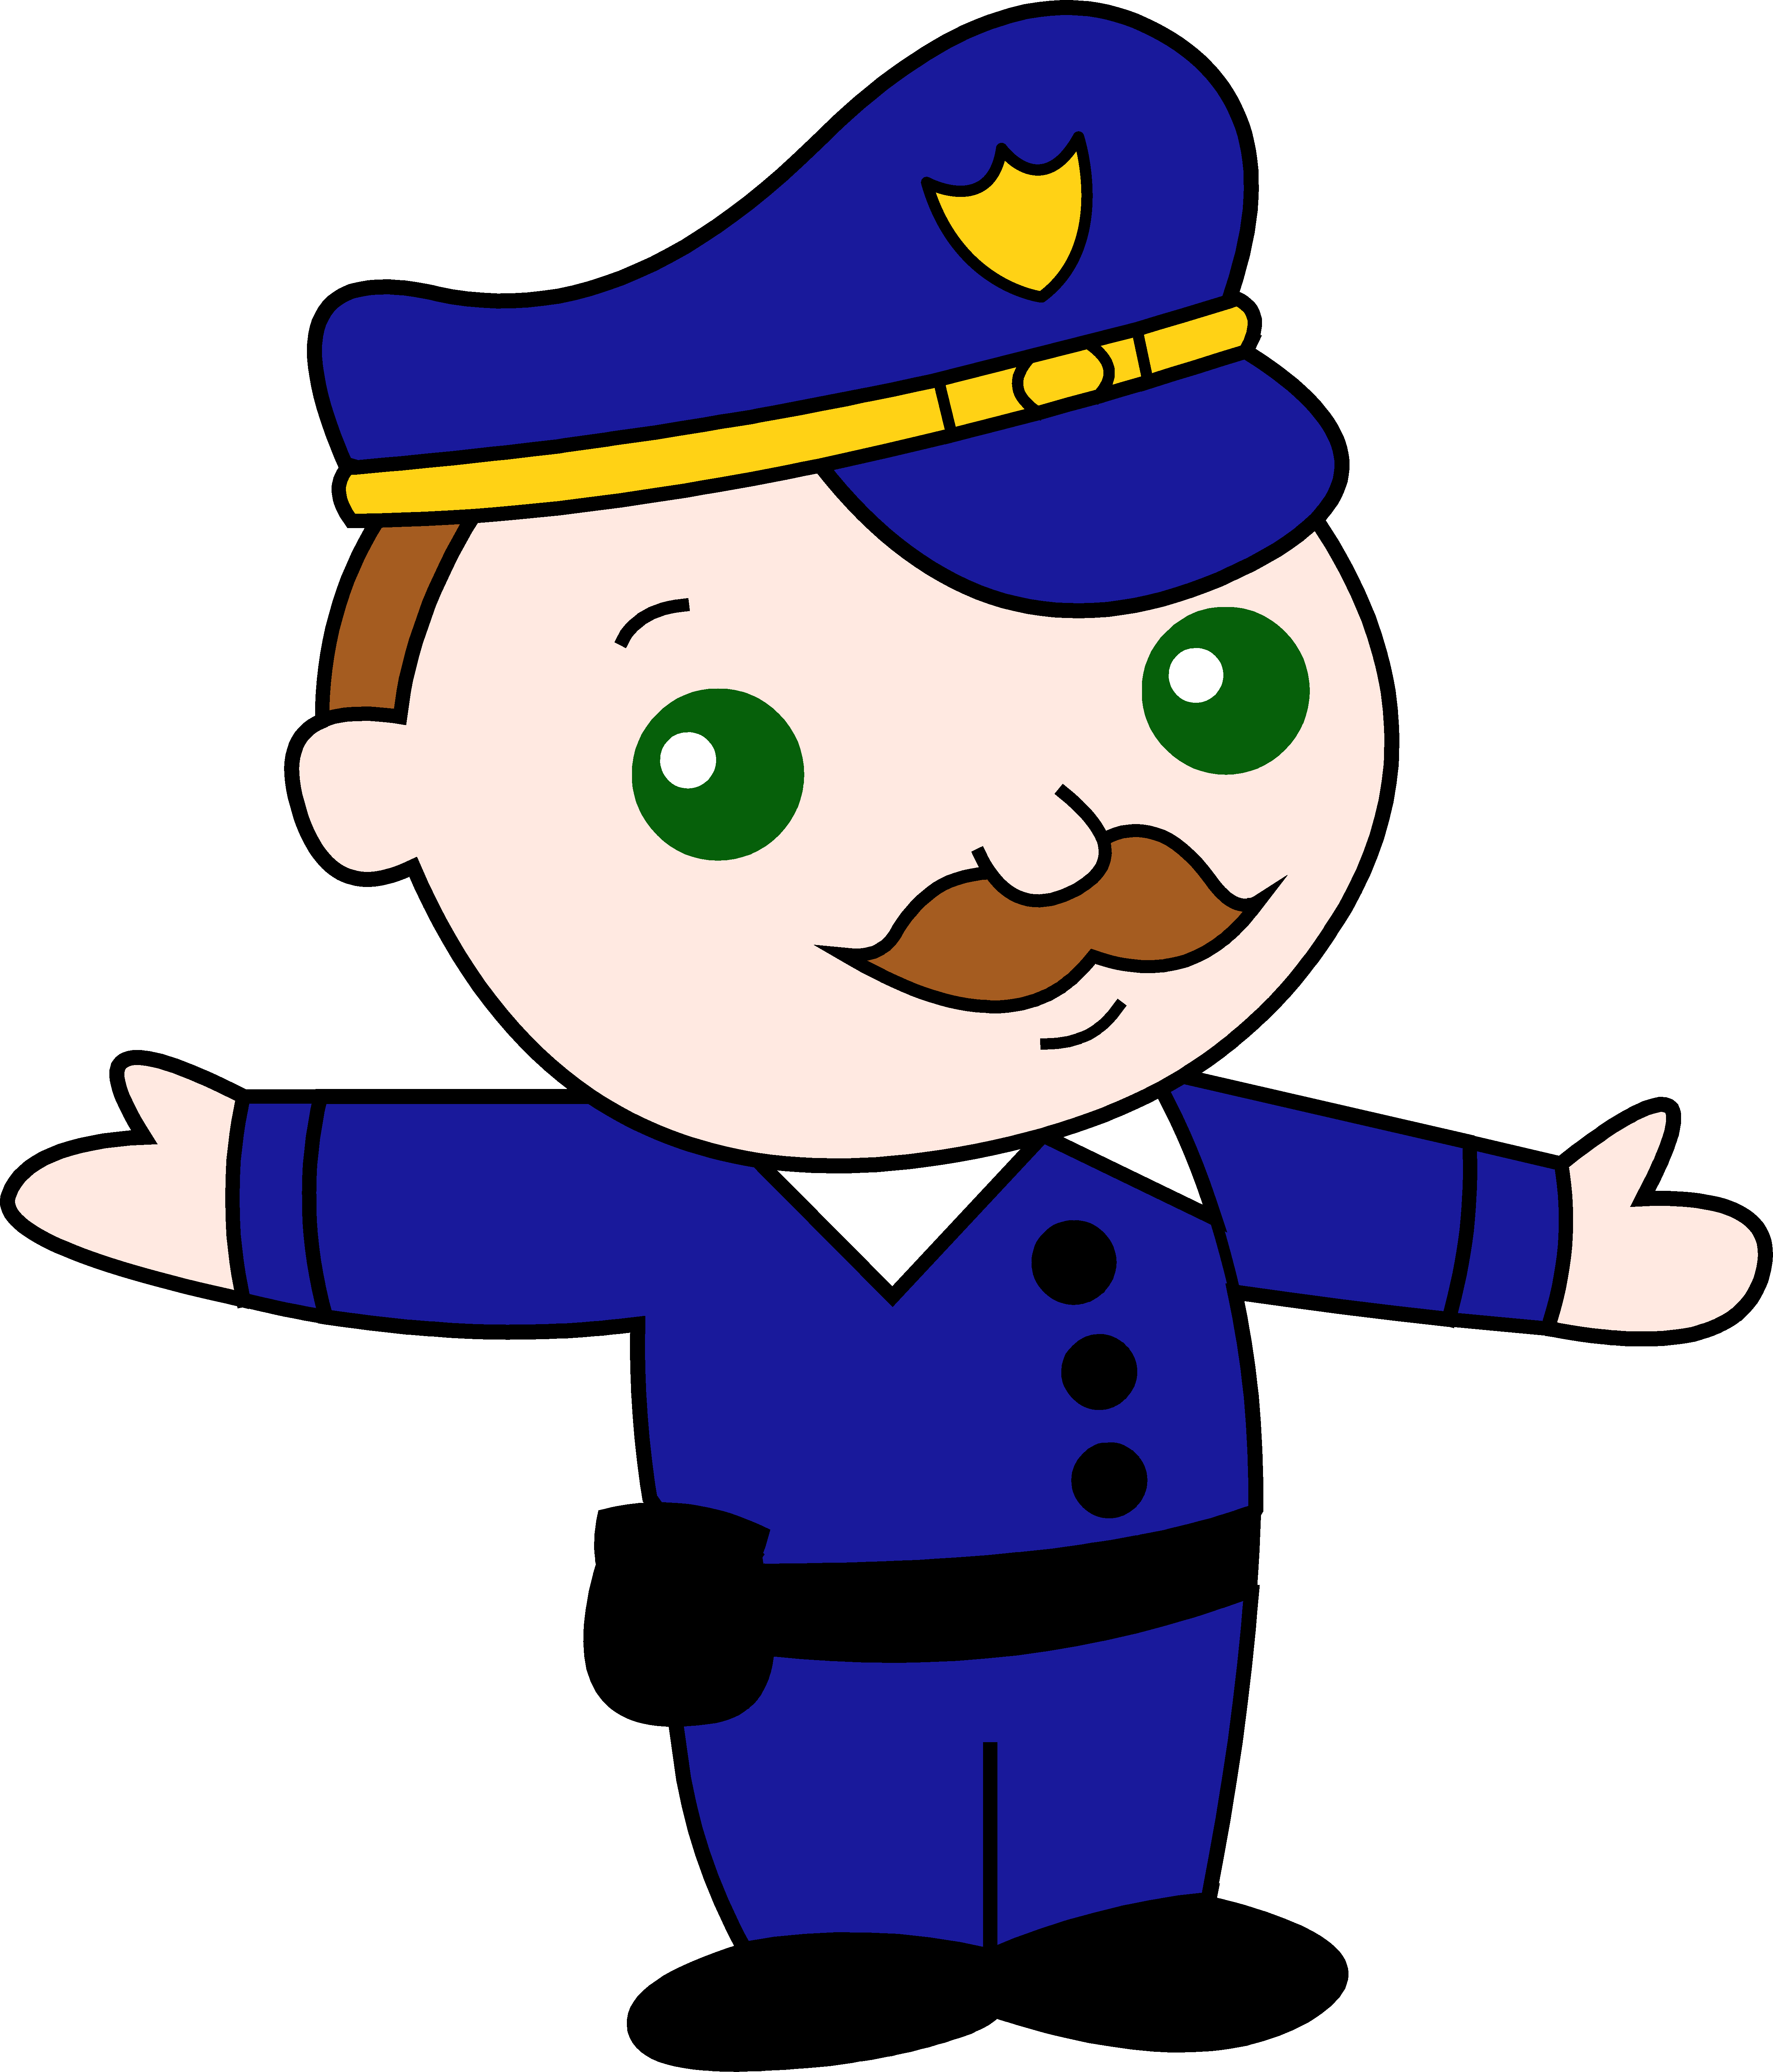 police clipart